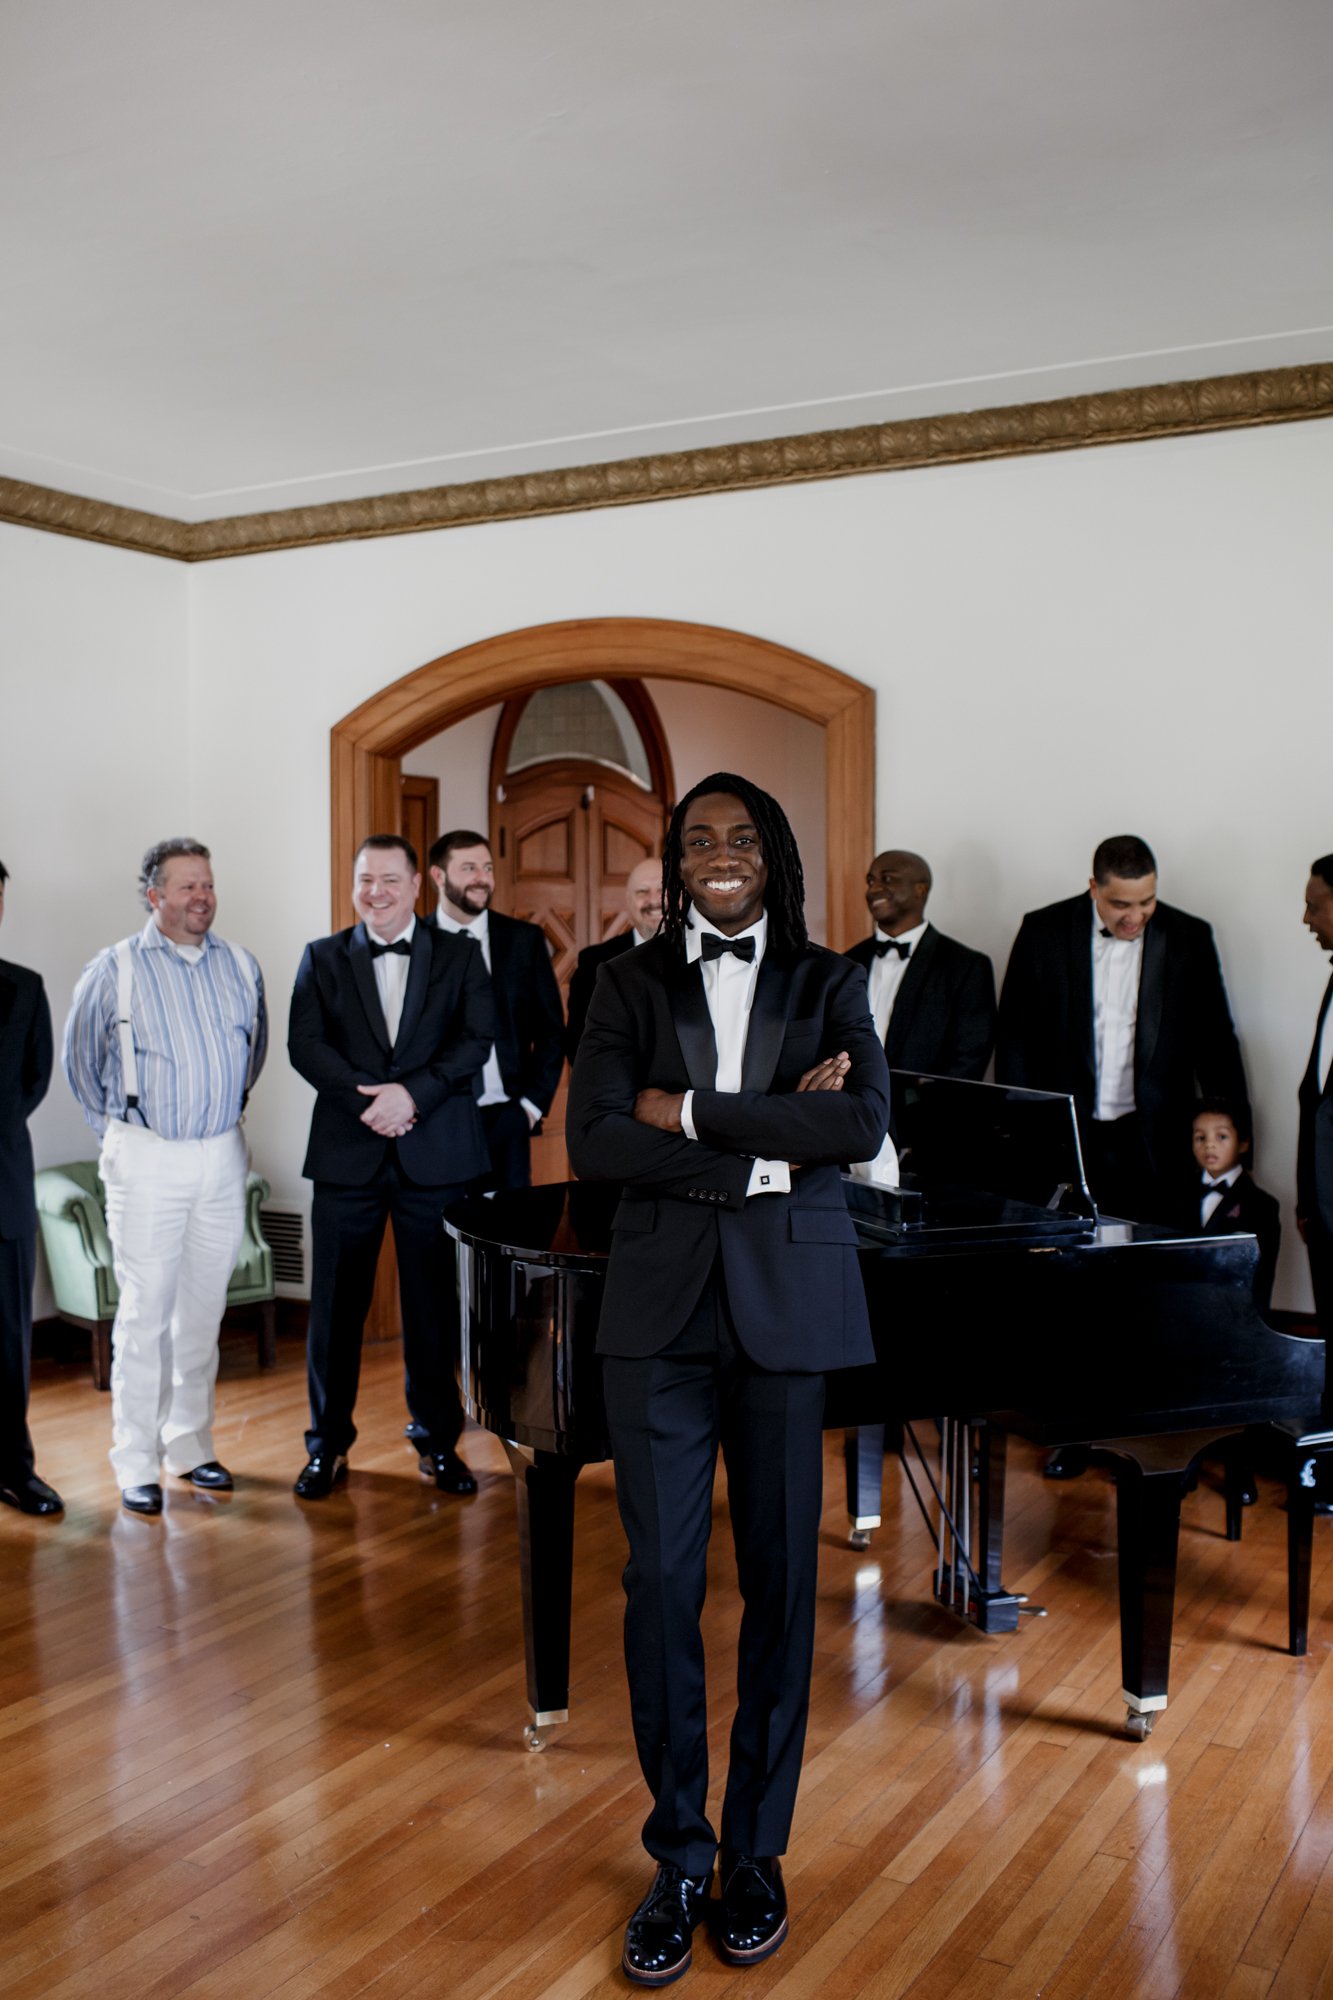 Private house preparations groom and groomsmen. New Orleans Style Wedding at McGovern Centennial Gardens